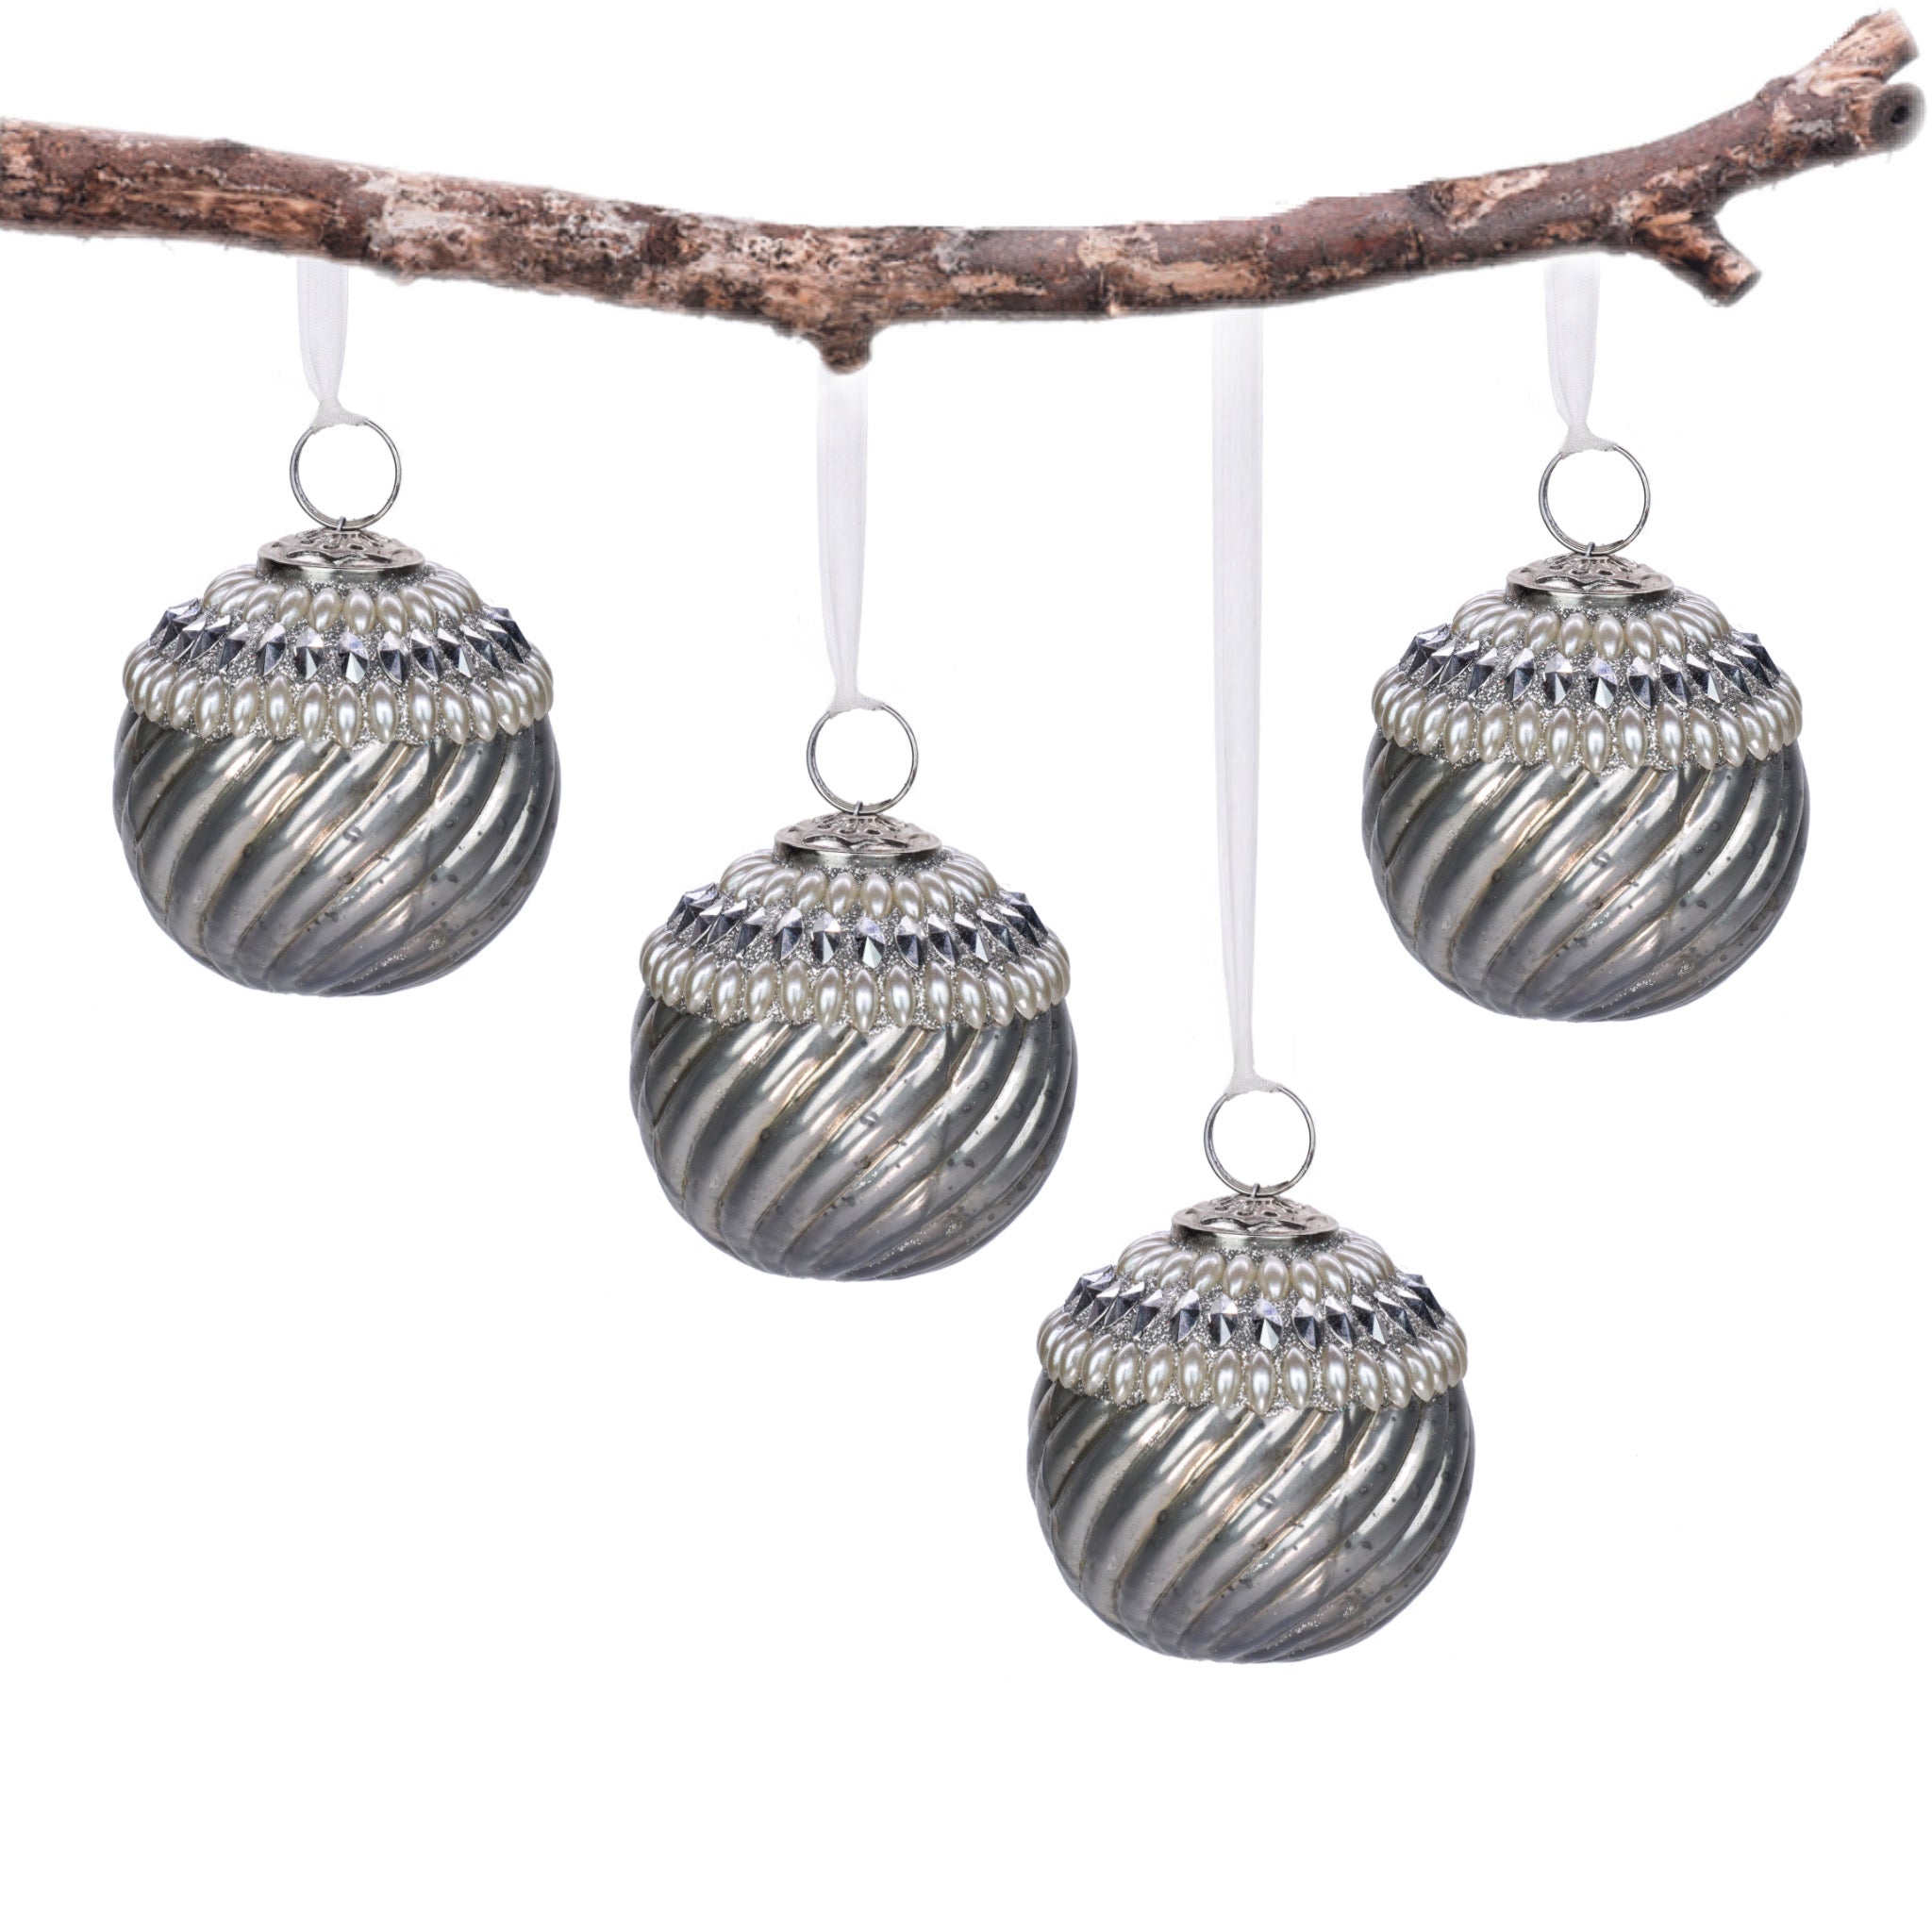 Timeless Classic Glass Tree Ornament in Cream & Silver, Boxed Set of 4